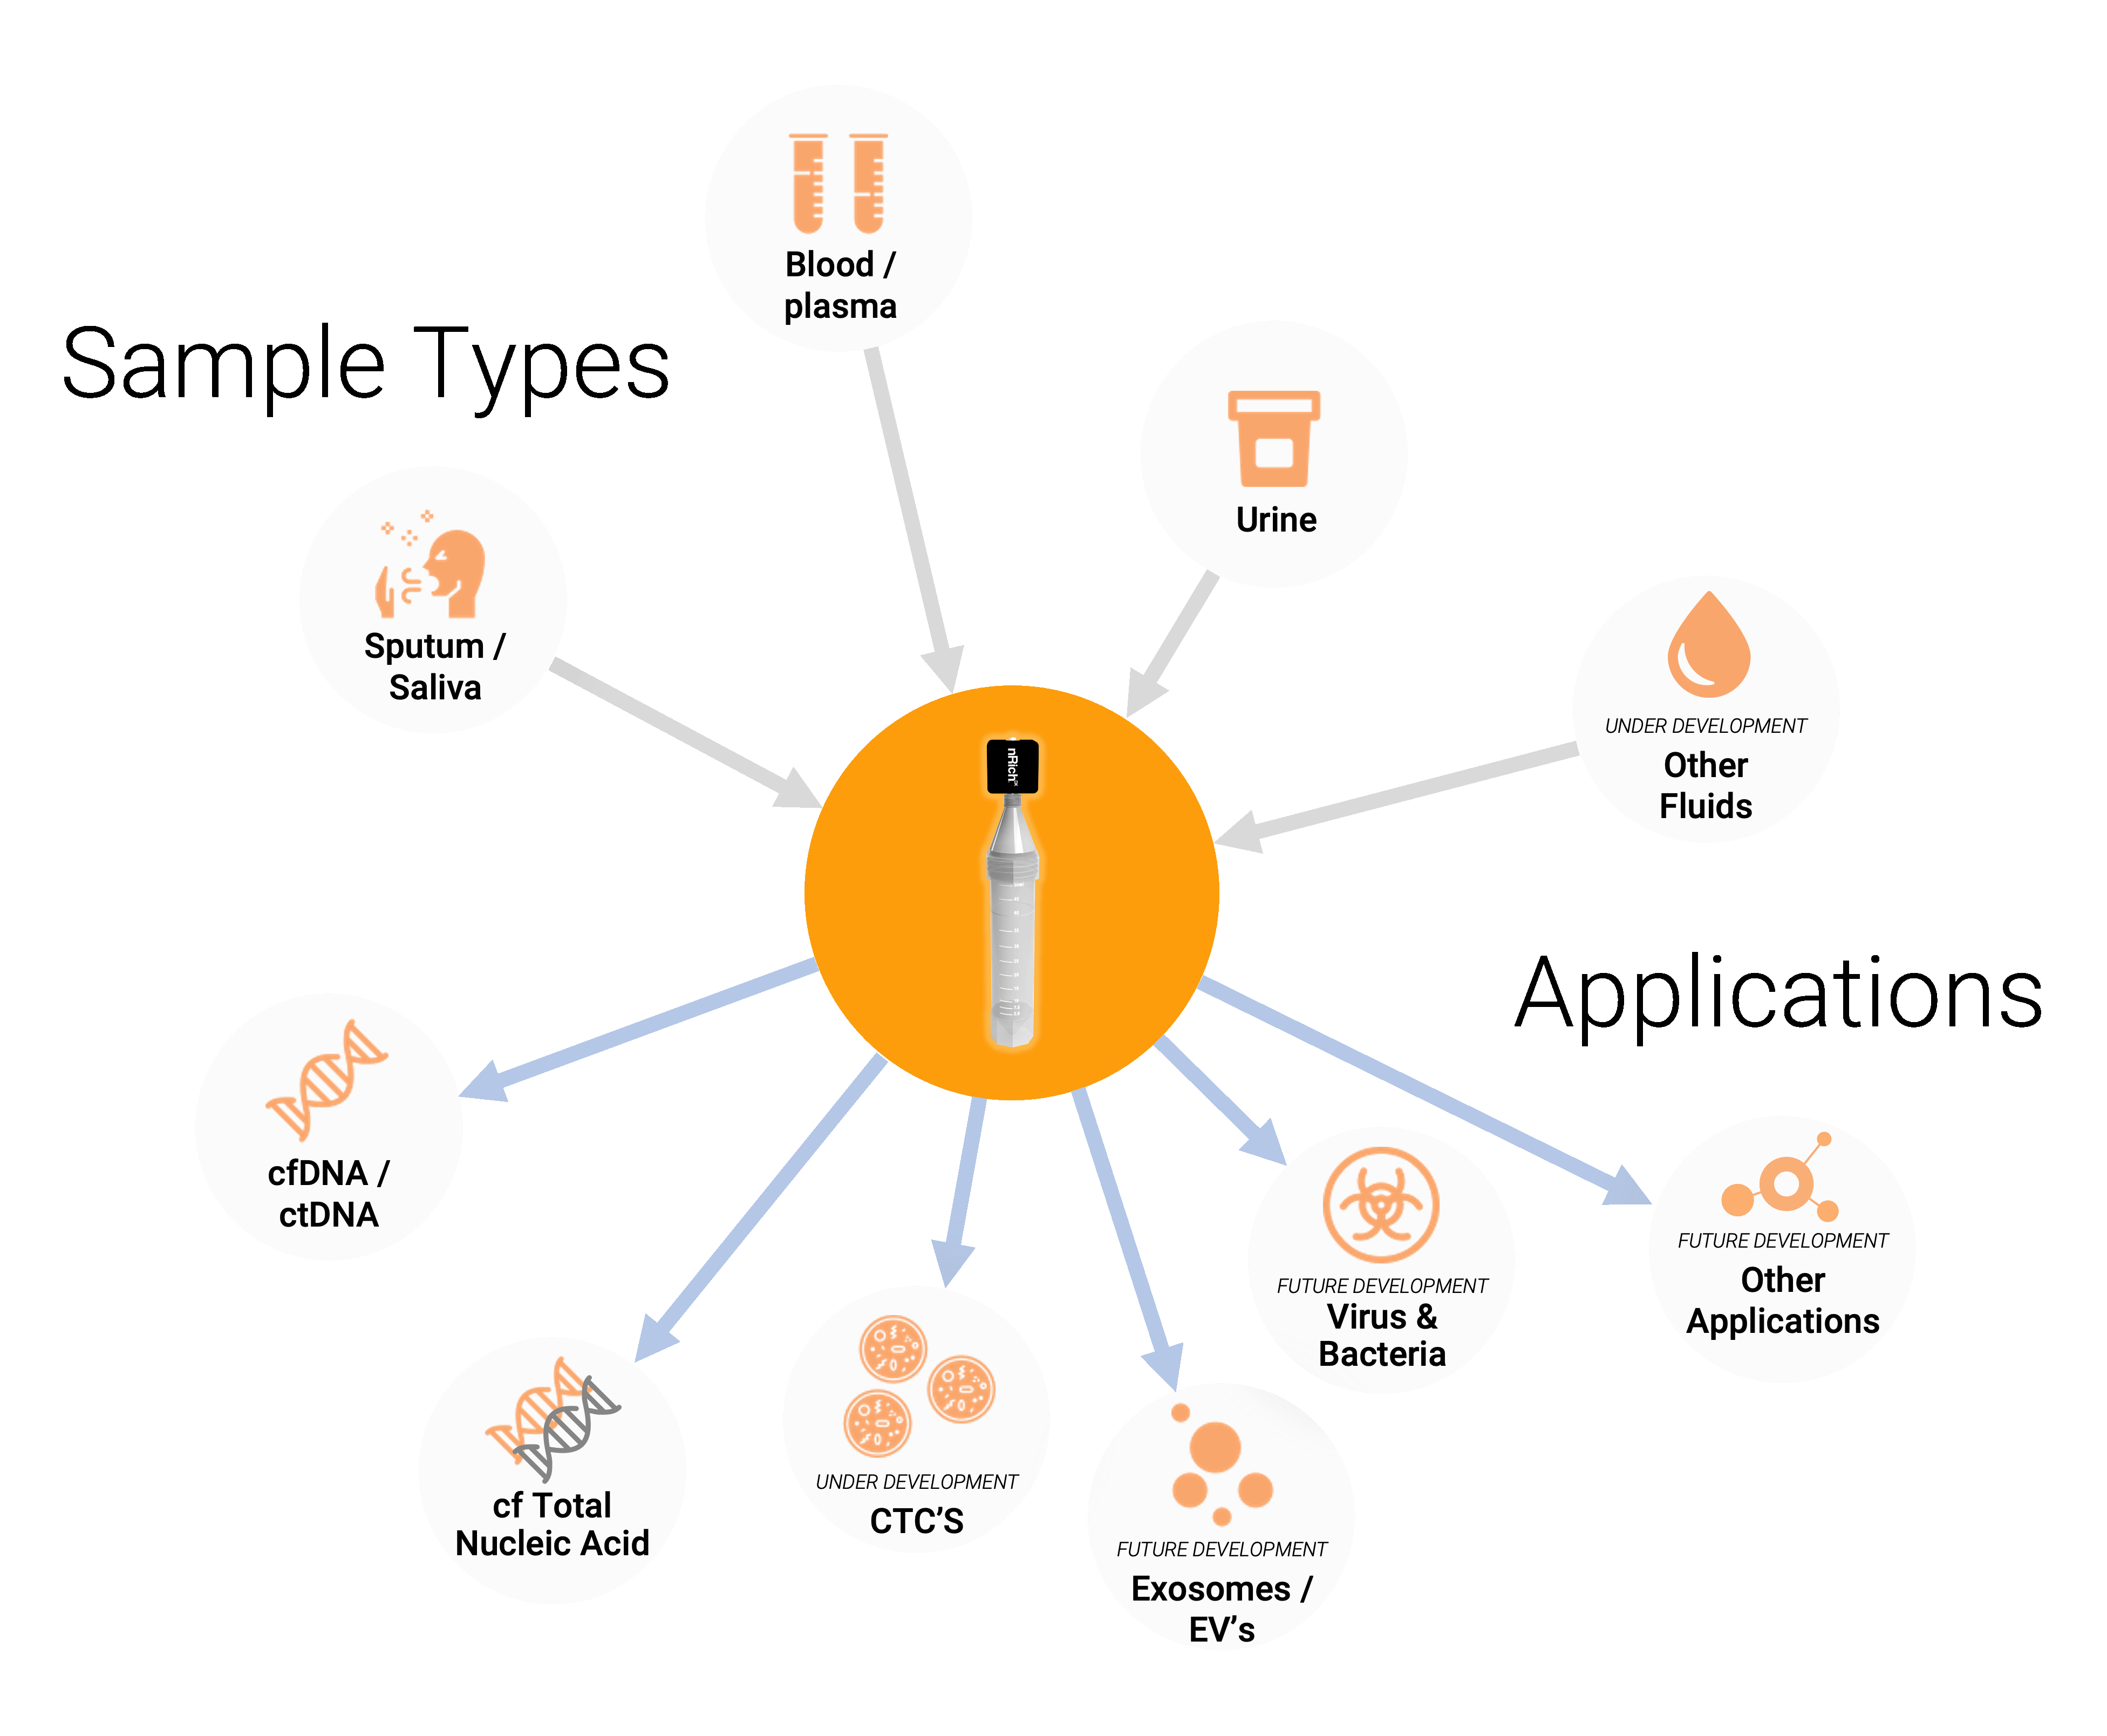 Samples and Applications diagram_forweb-1